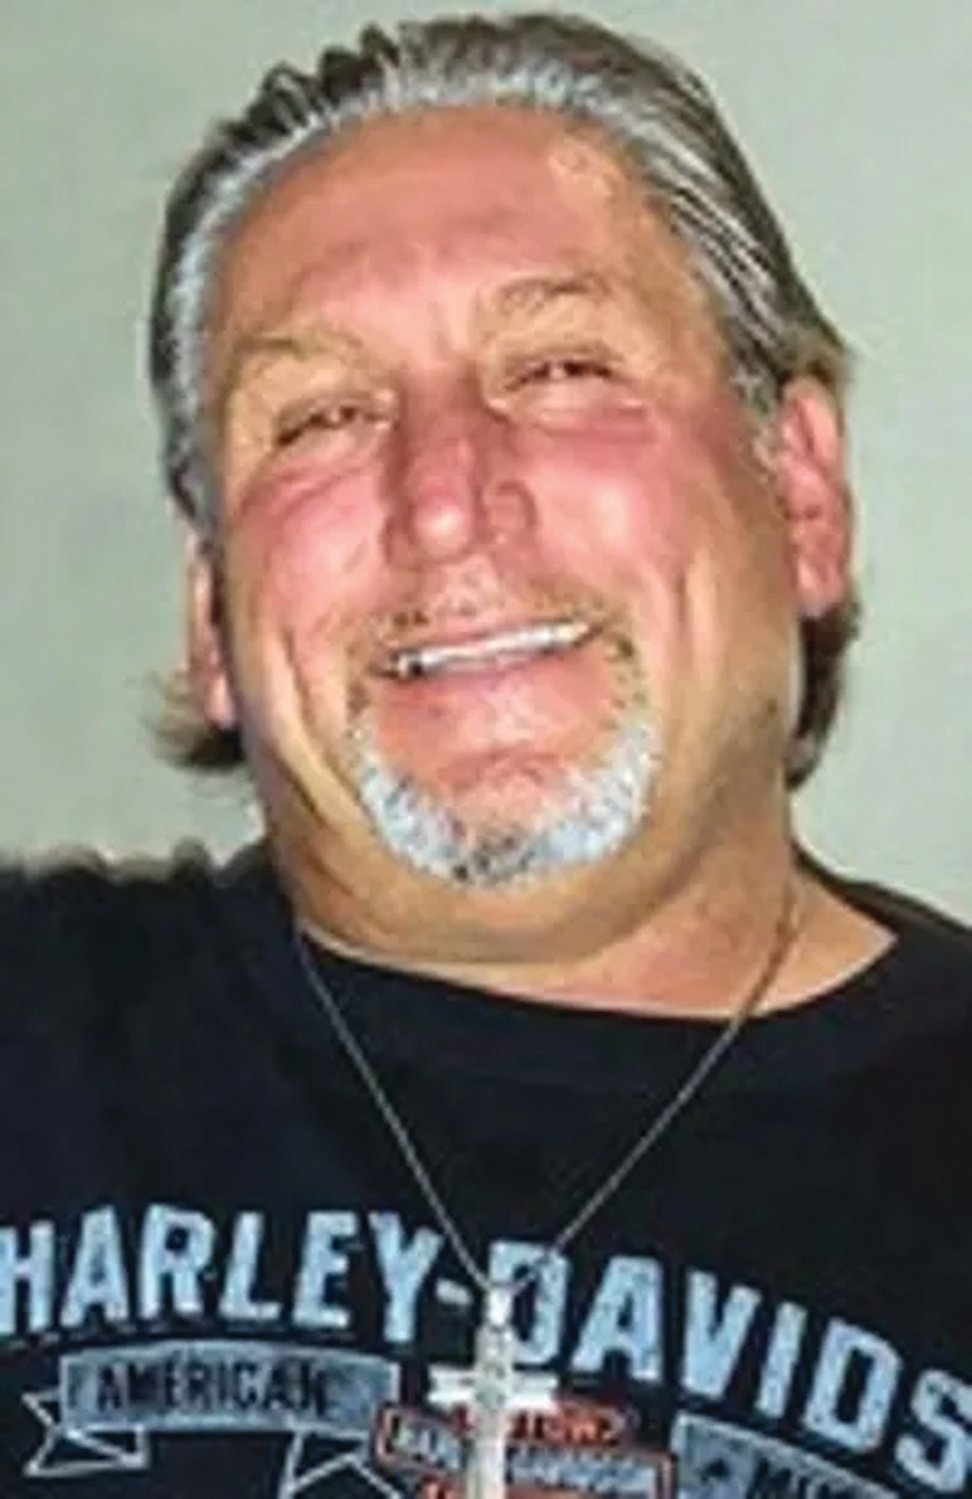 TOO SOON: Joseph Pingitore III passed away suddenly last October at the tender age of 60 years.